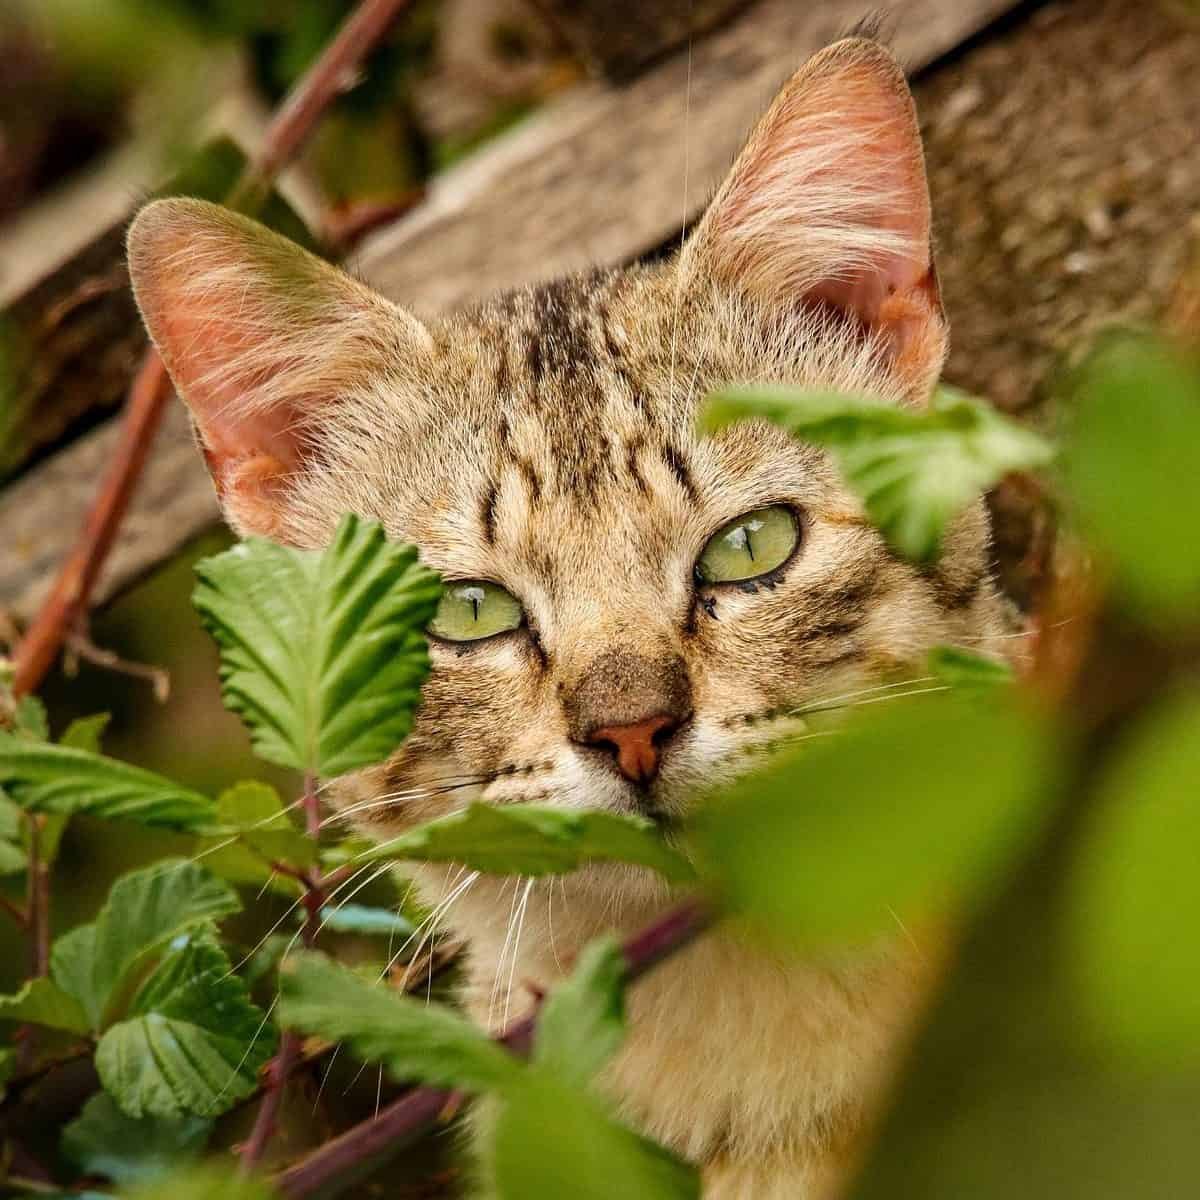 A cat lurking in the bushes